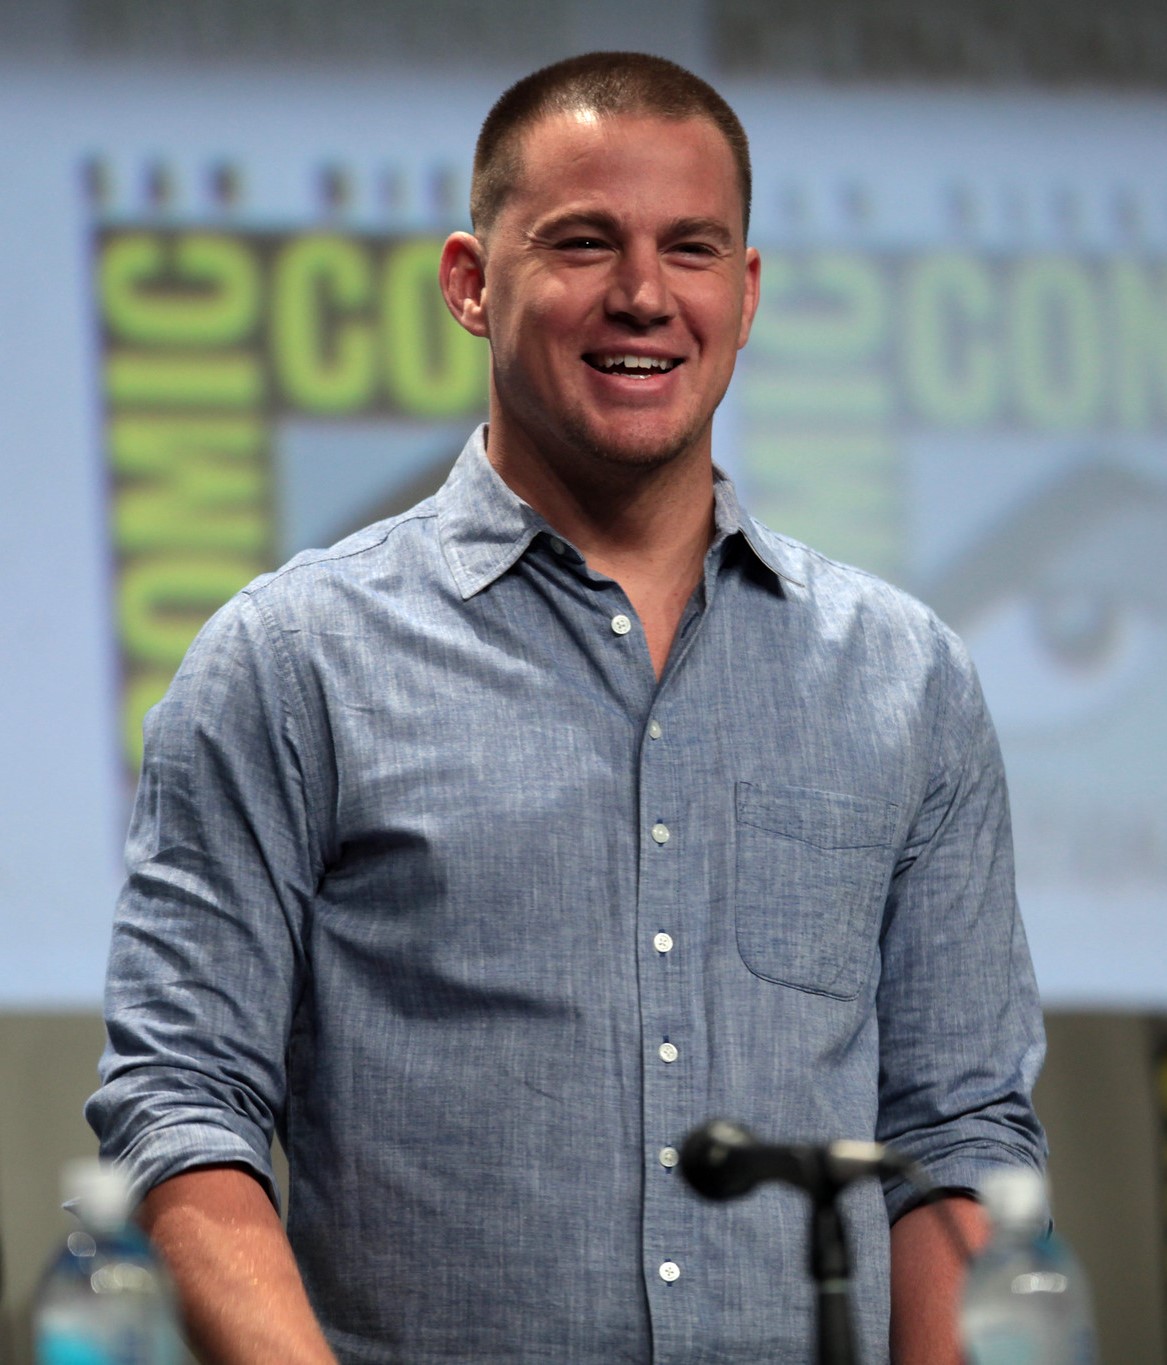 Channing Tatum, American actor living with ADHD